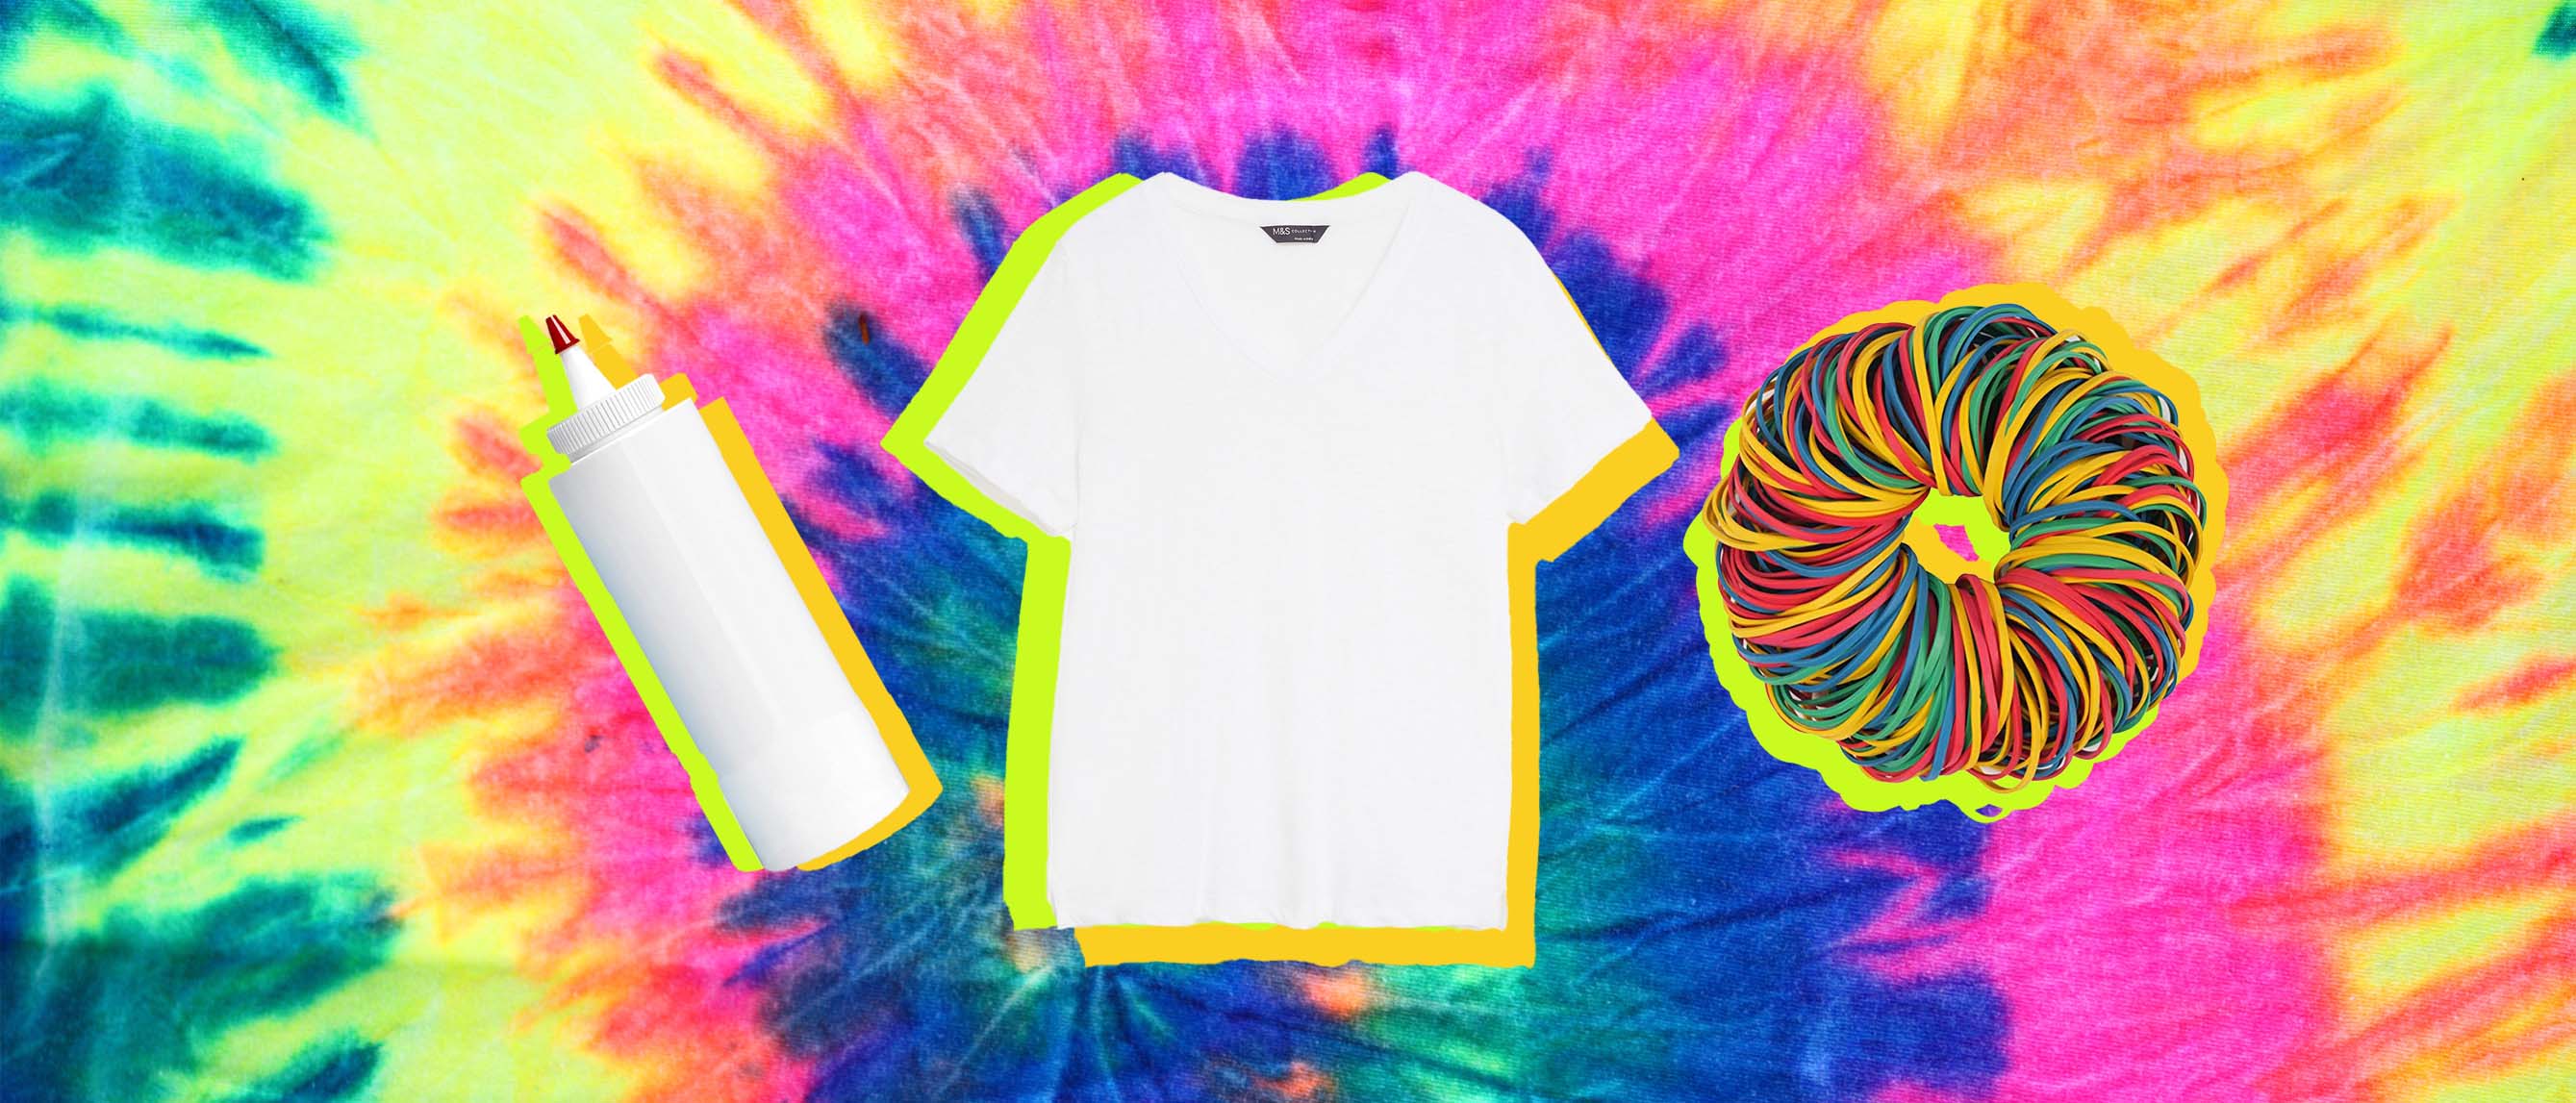 How to Tie Dye